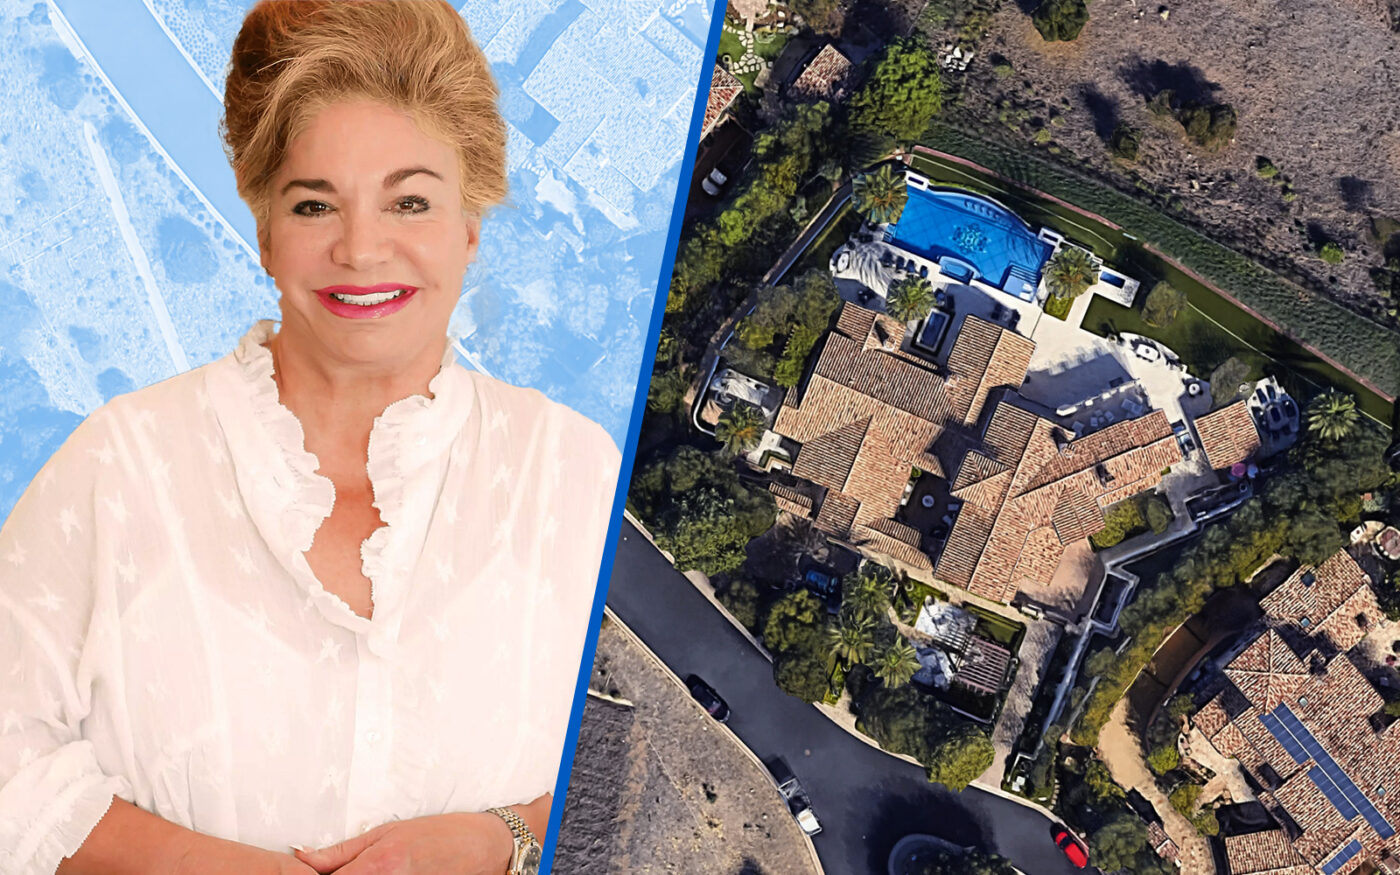 Cosmetics CEO Sells House in Irvine’s Shady Canyon for $25M